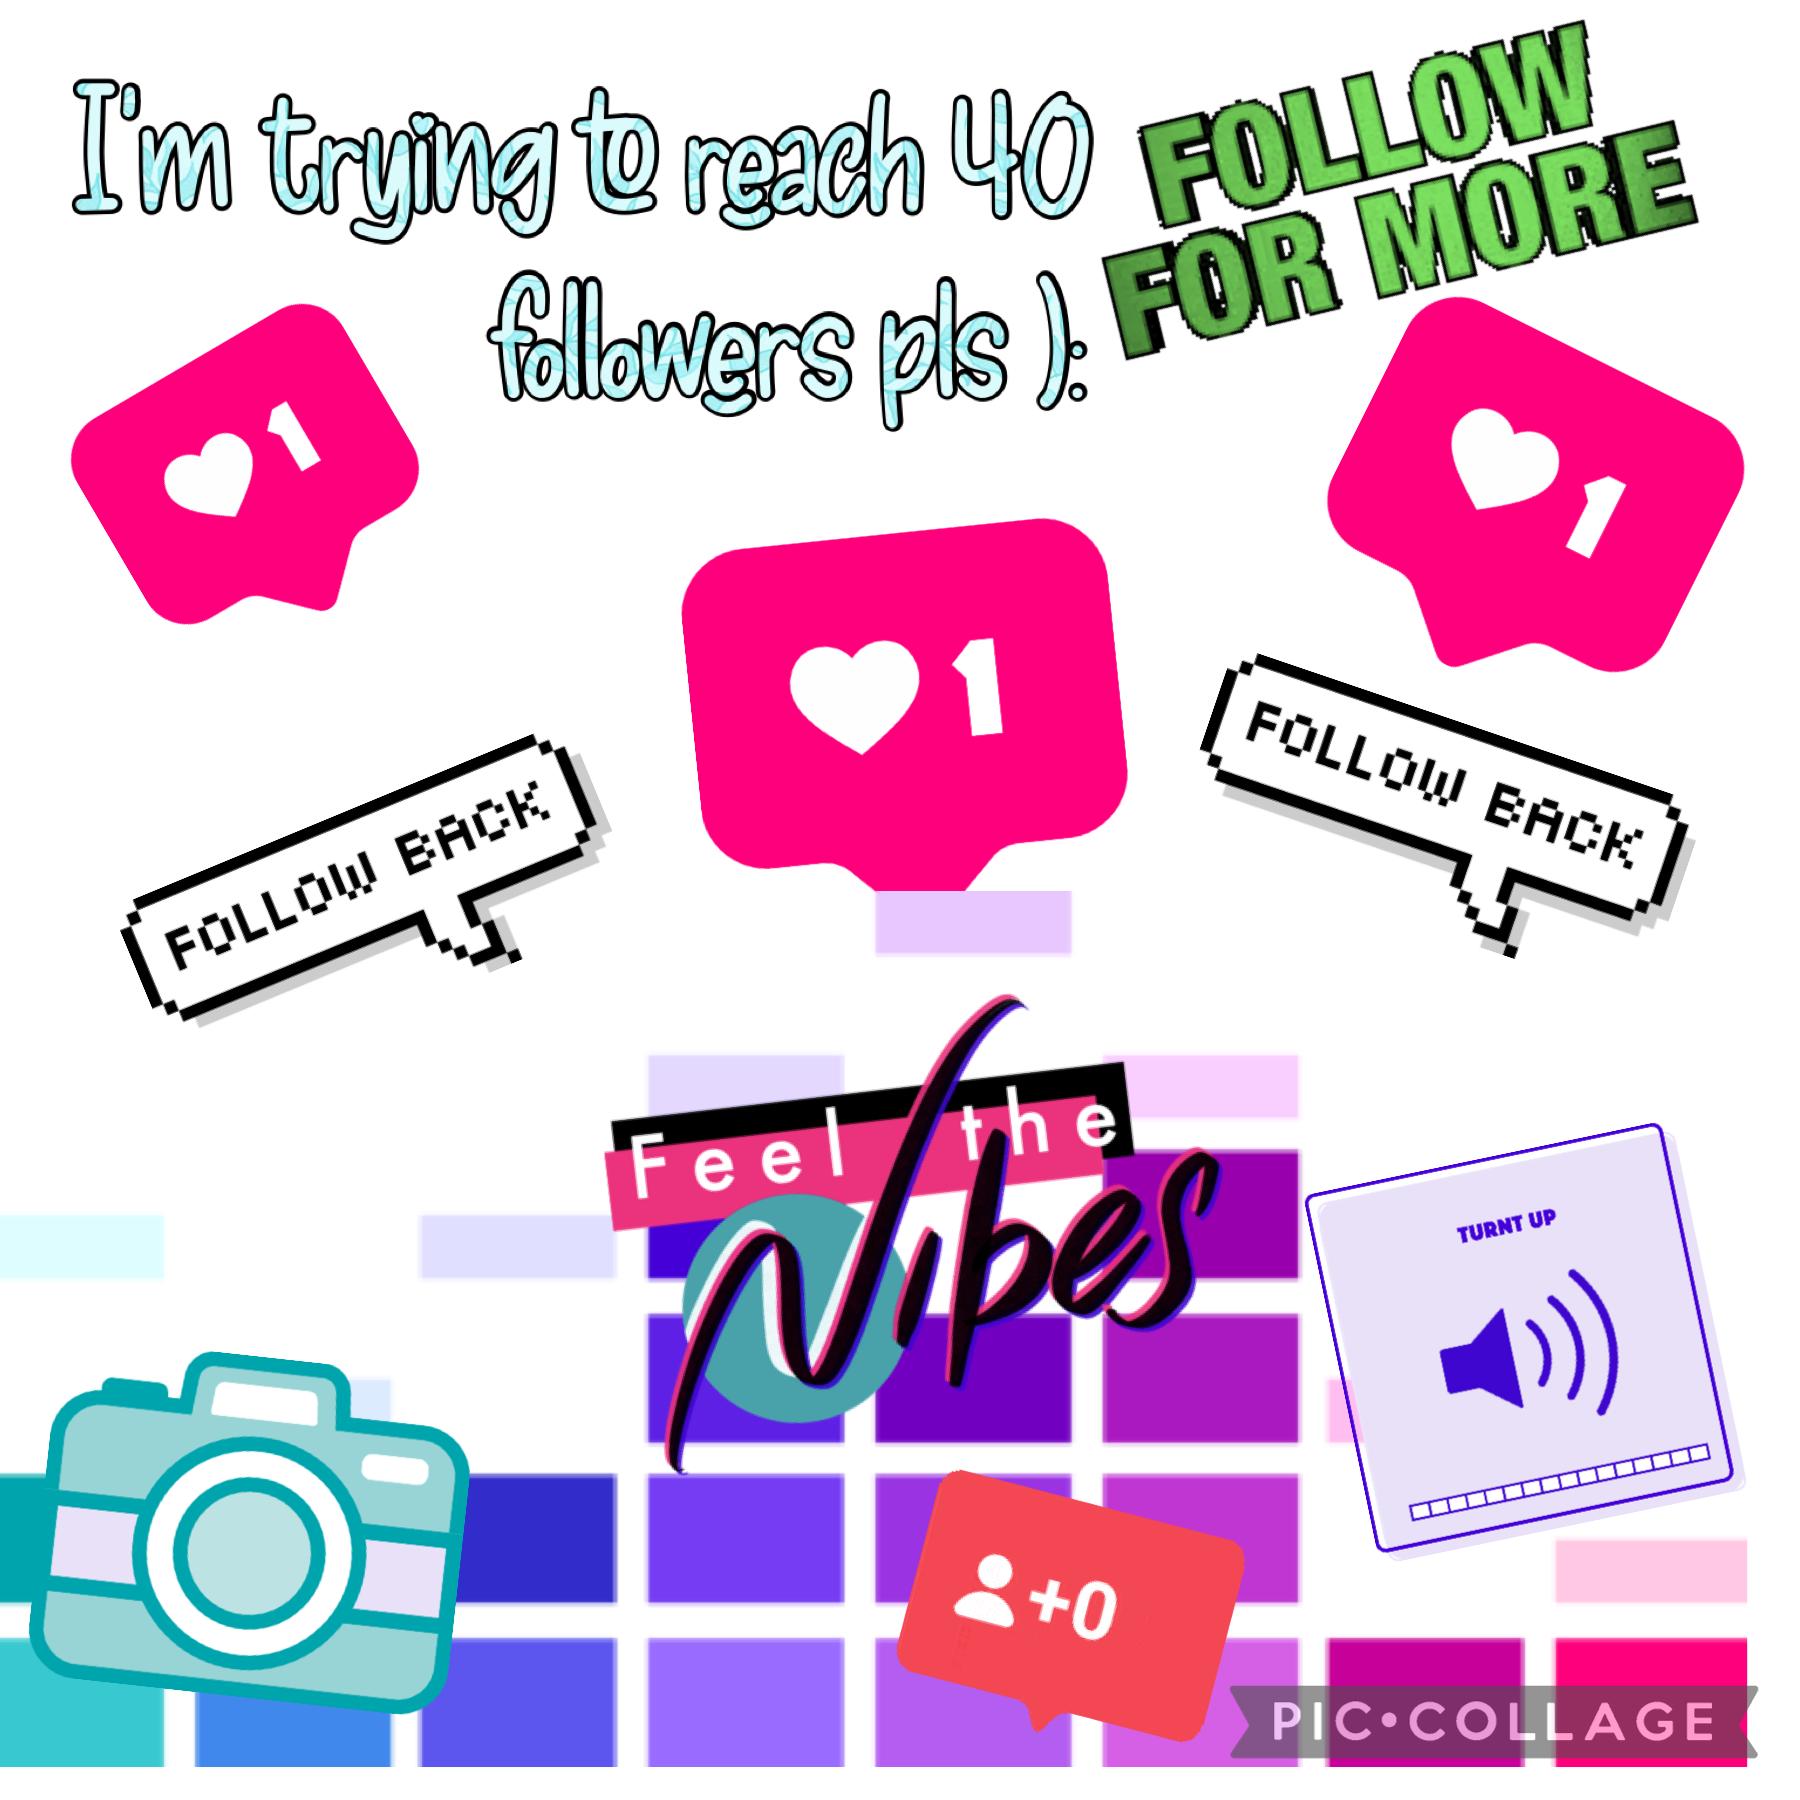 Pls follow me and there’s more ahead then!